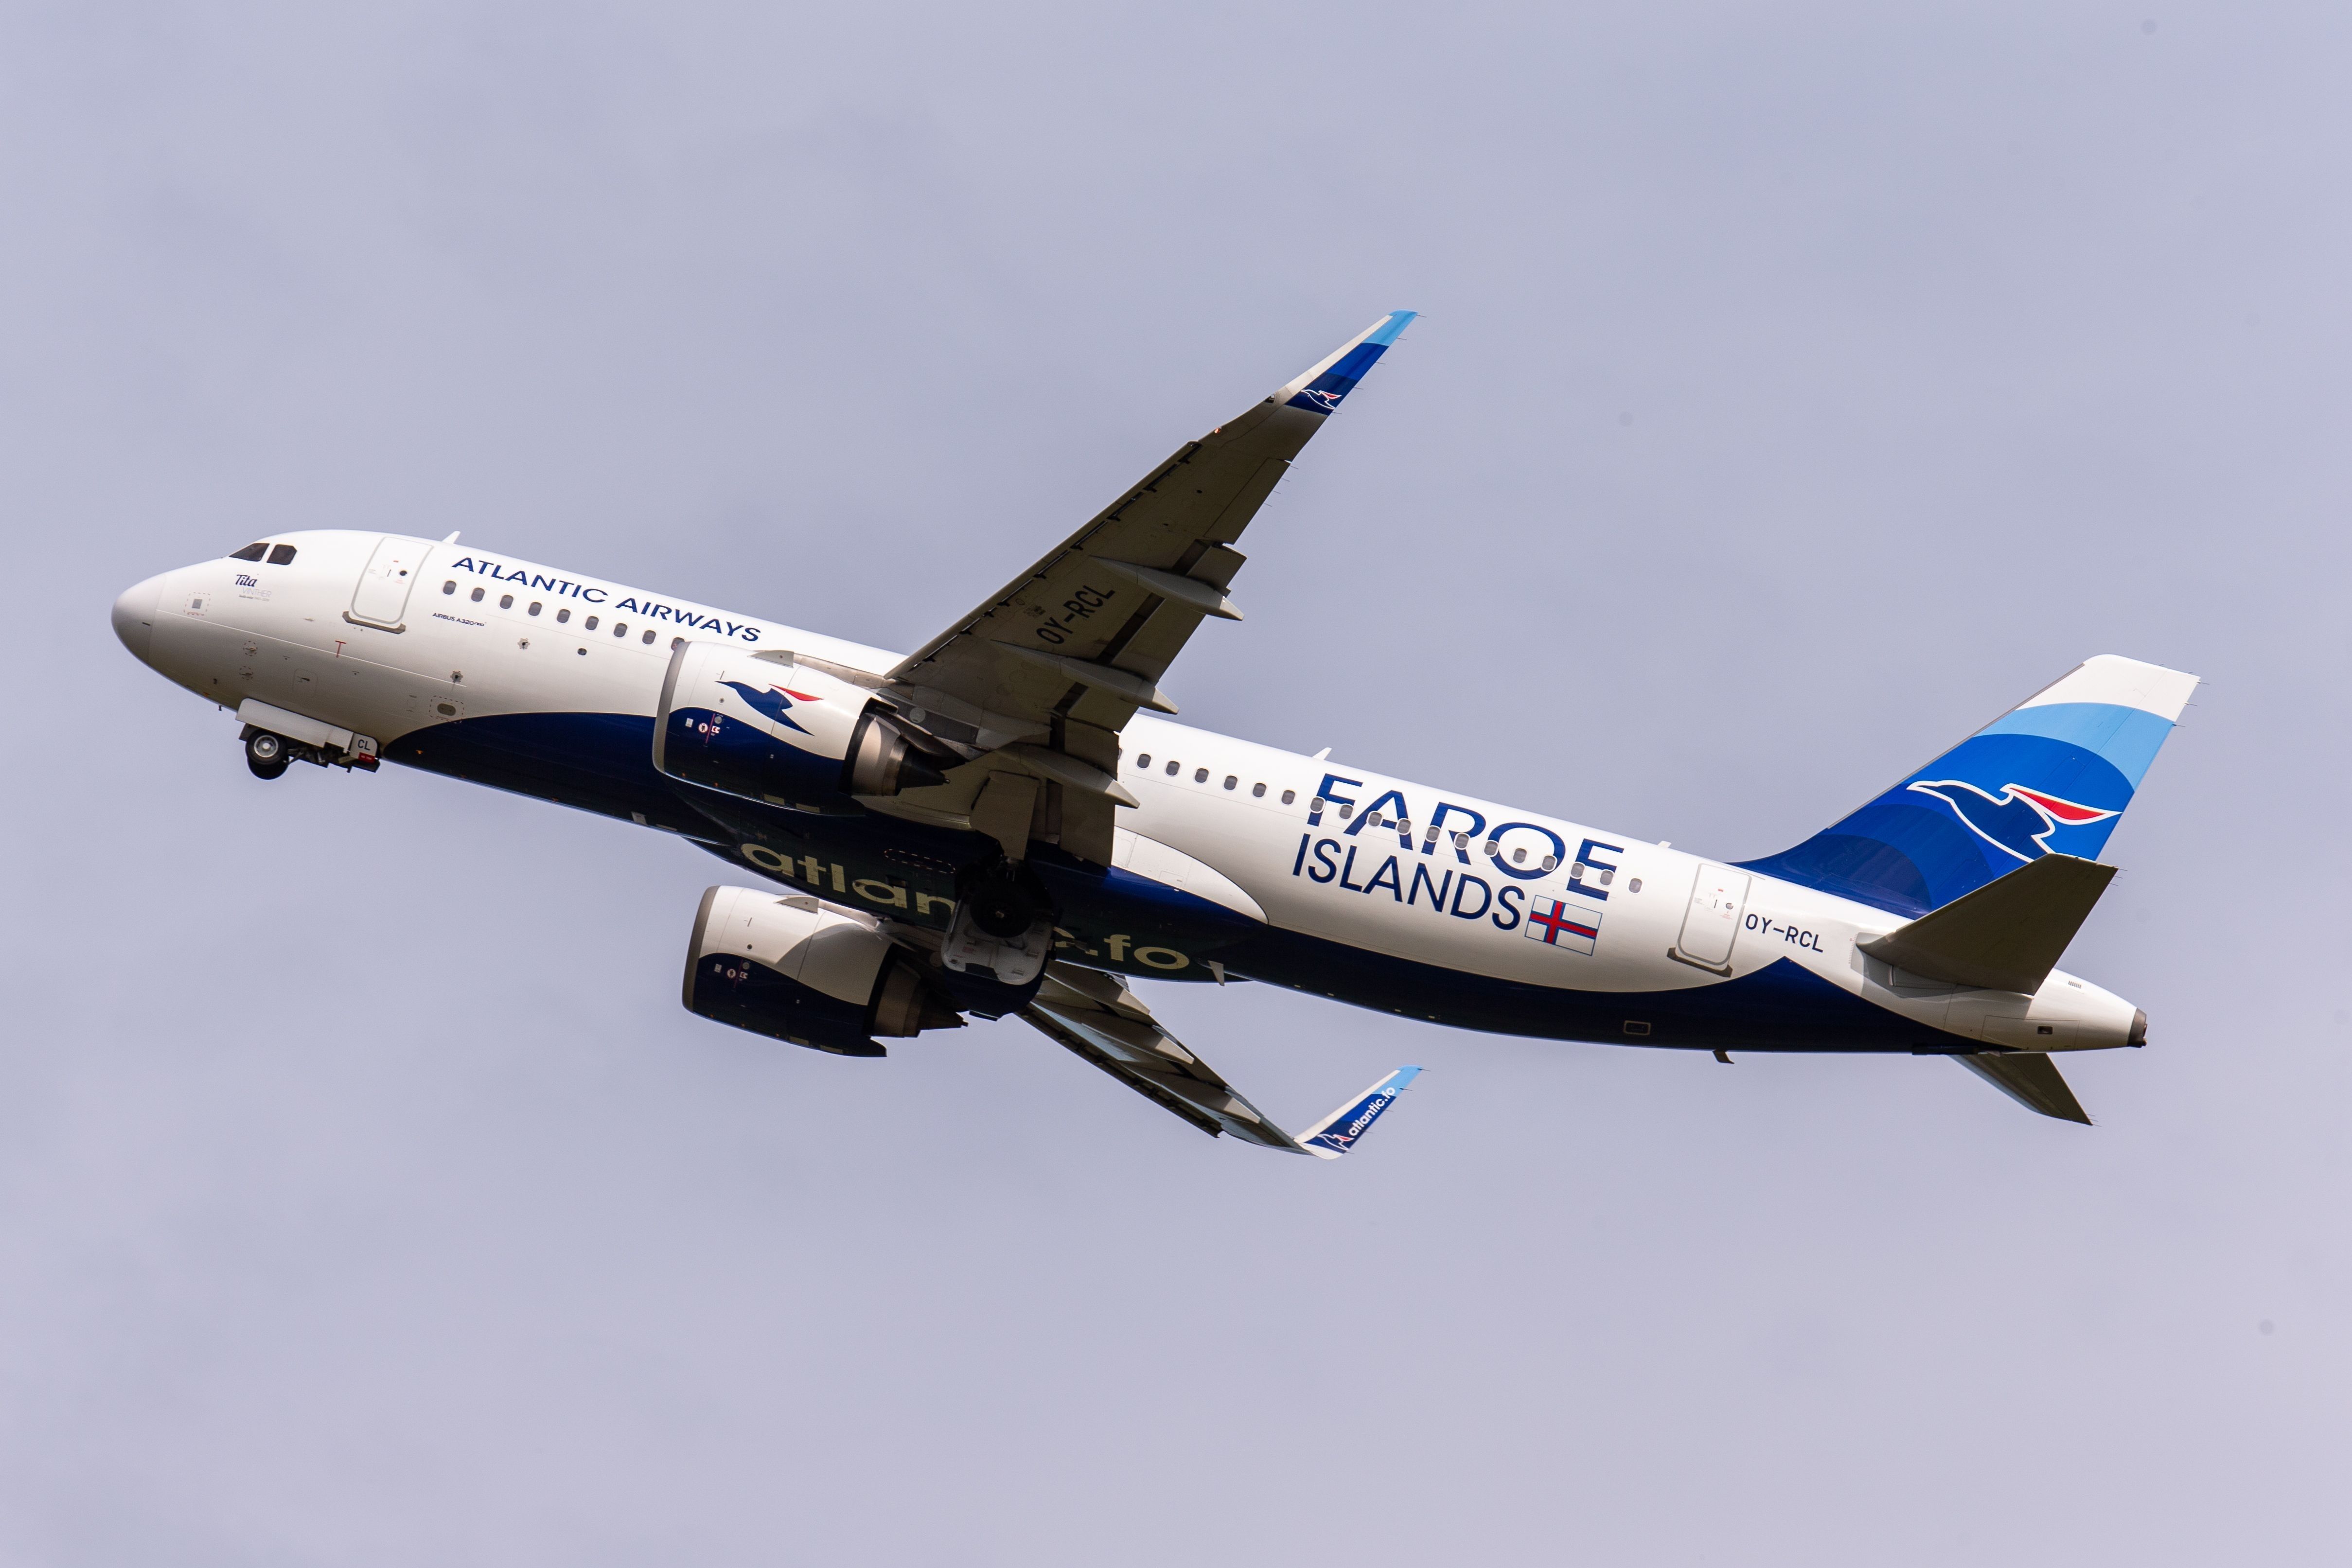 A closeup of an Atlantic Airways Airbus A320-200 flying in the sky.